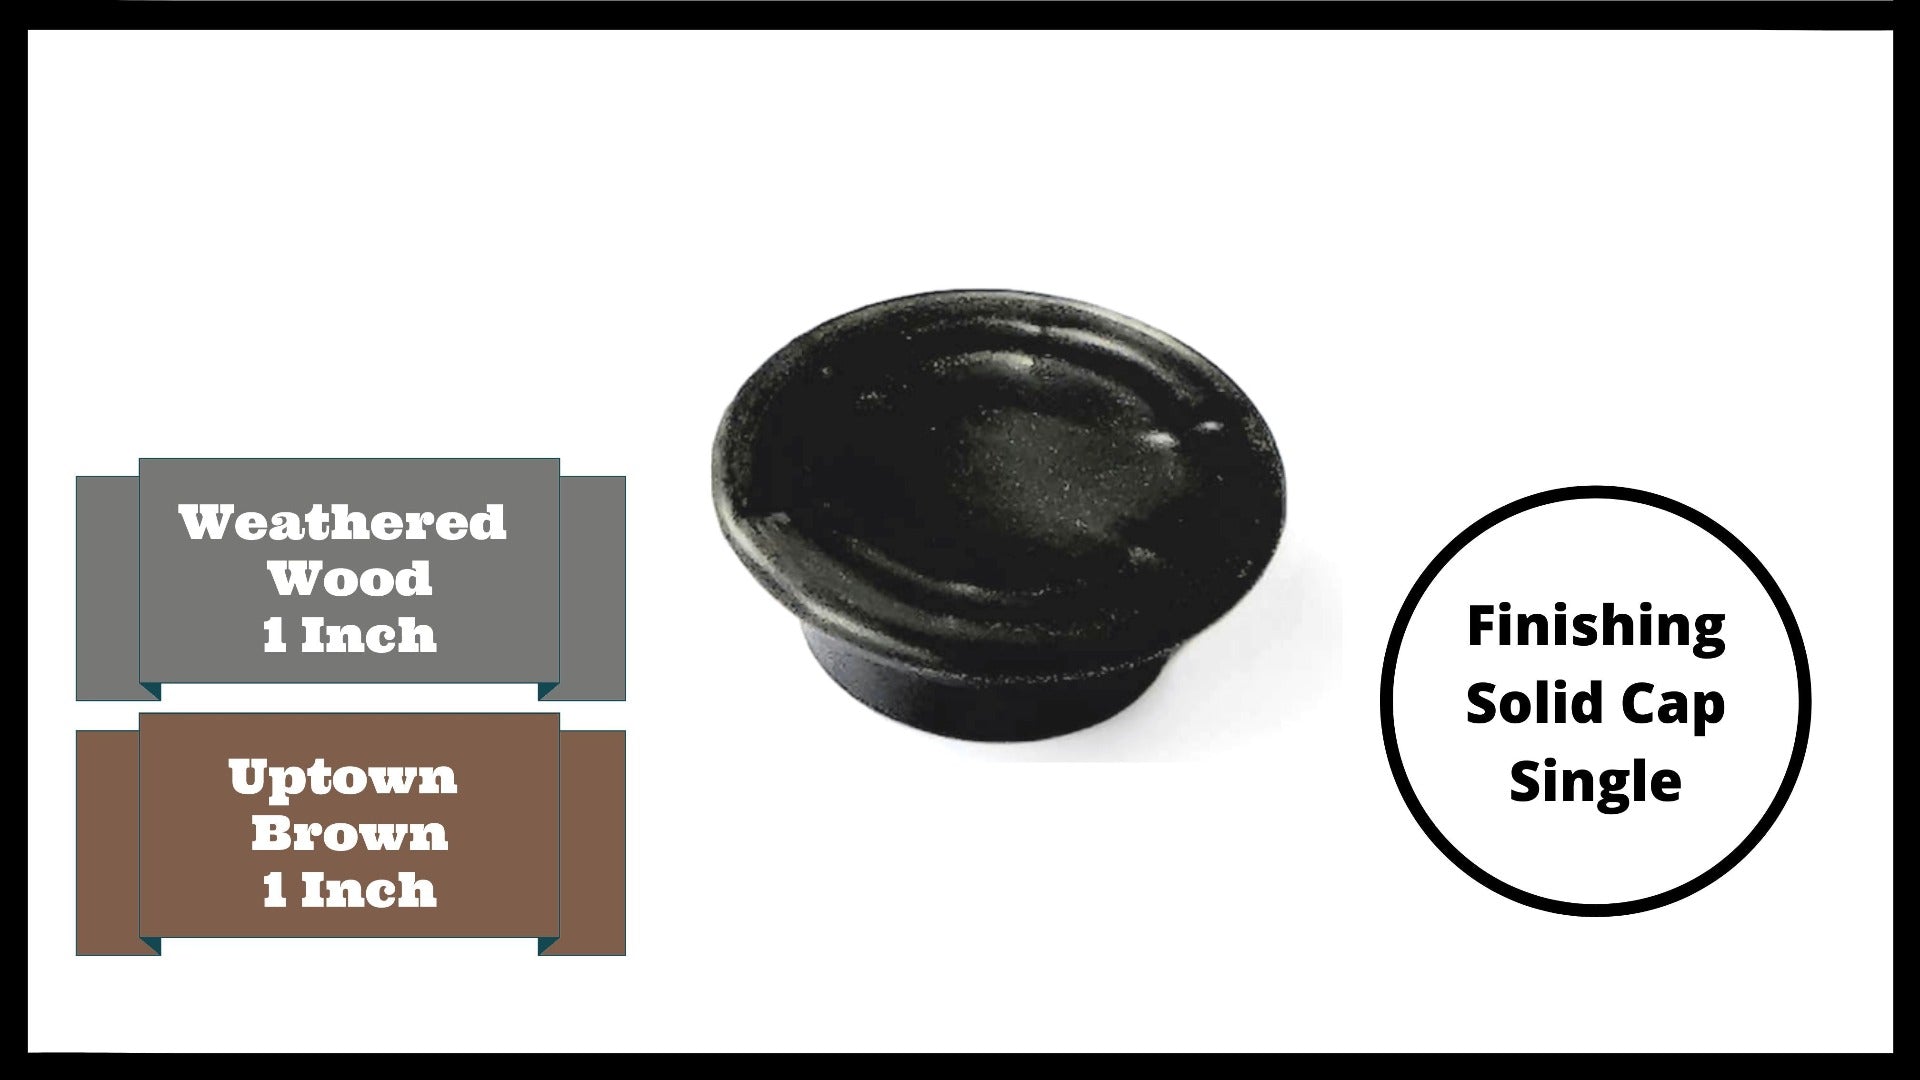 Tool-Free Snap-Lock Raised Garden Bed Finishing Solid Cap – 1” Replacement (Single-Black) Parts Frame It All 